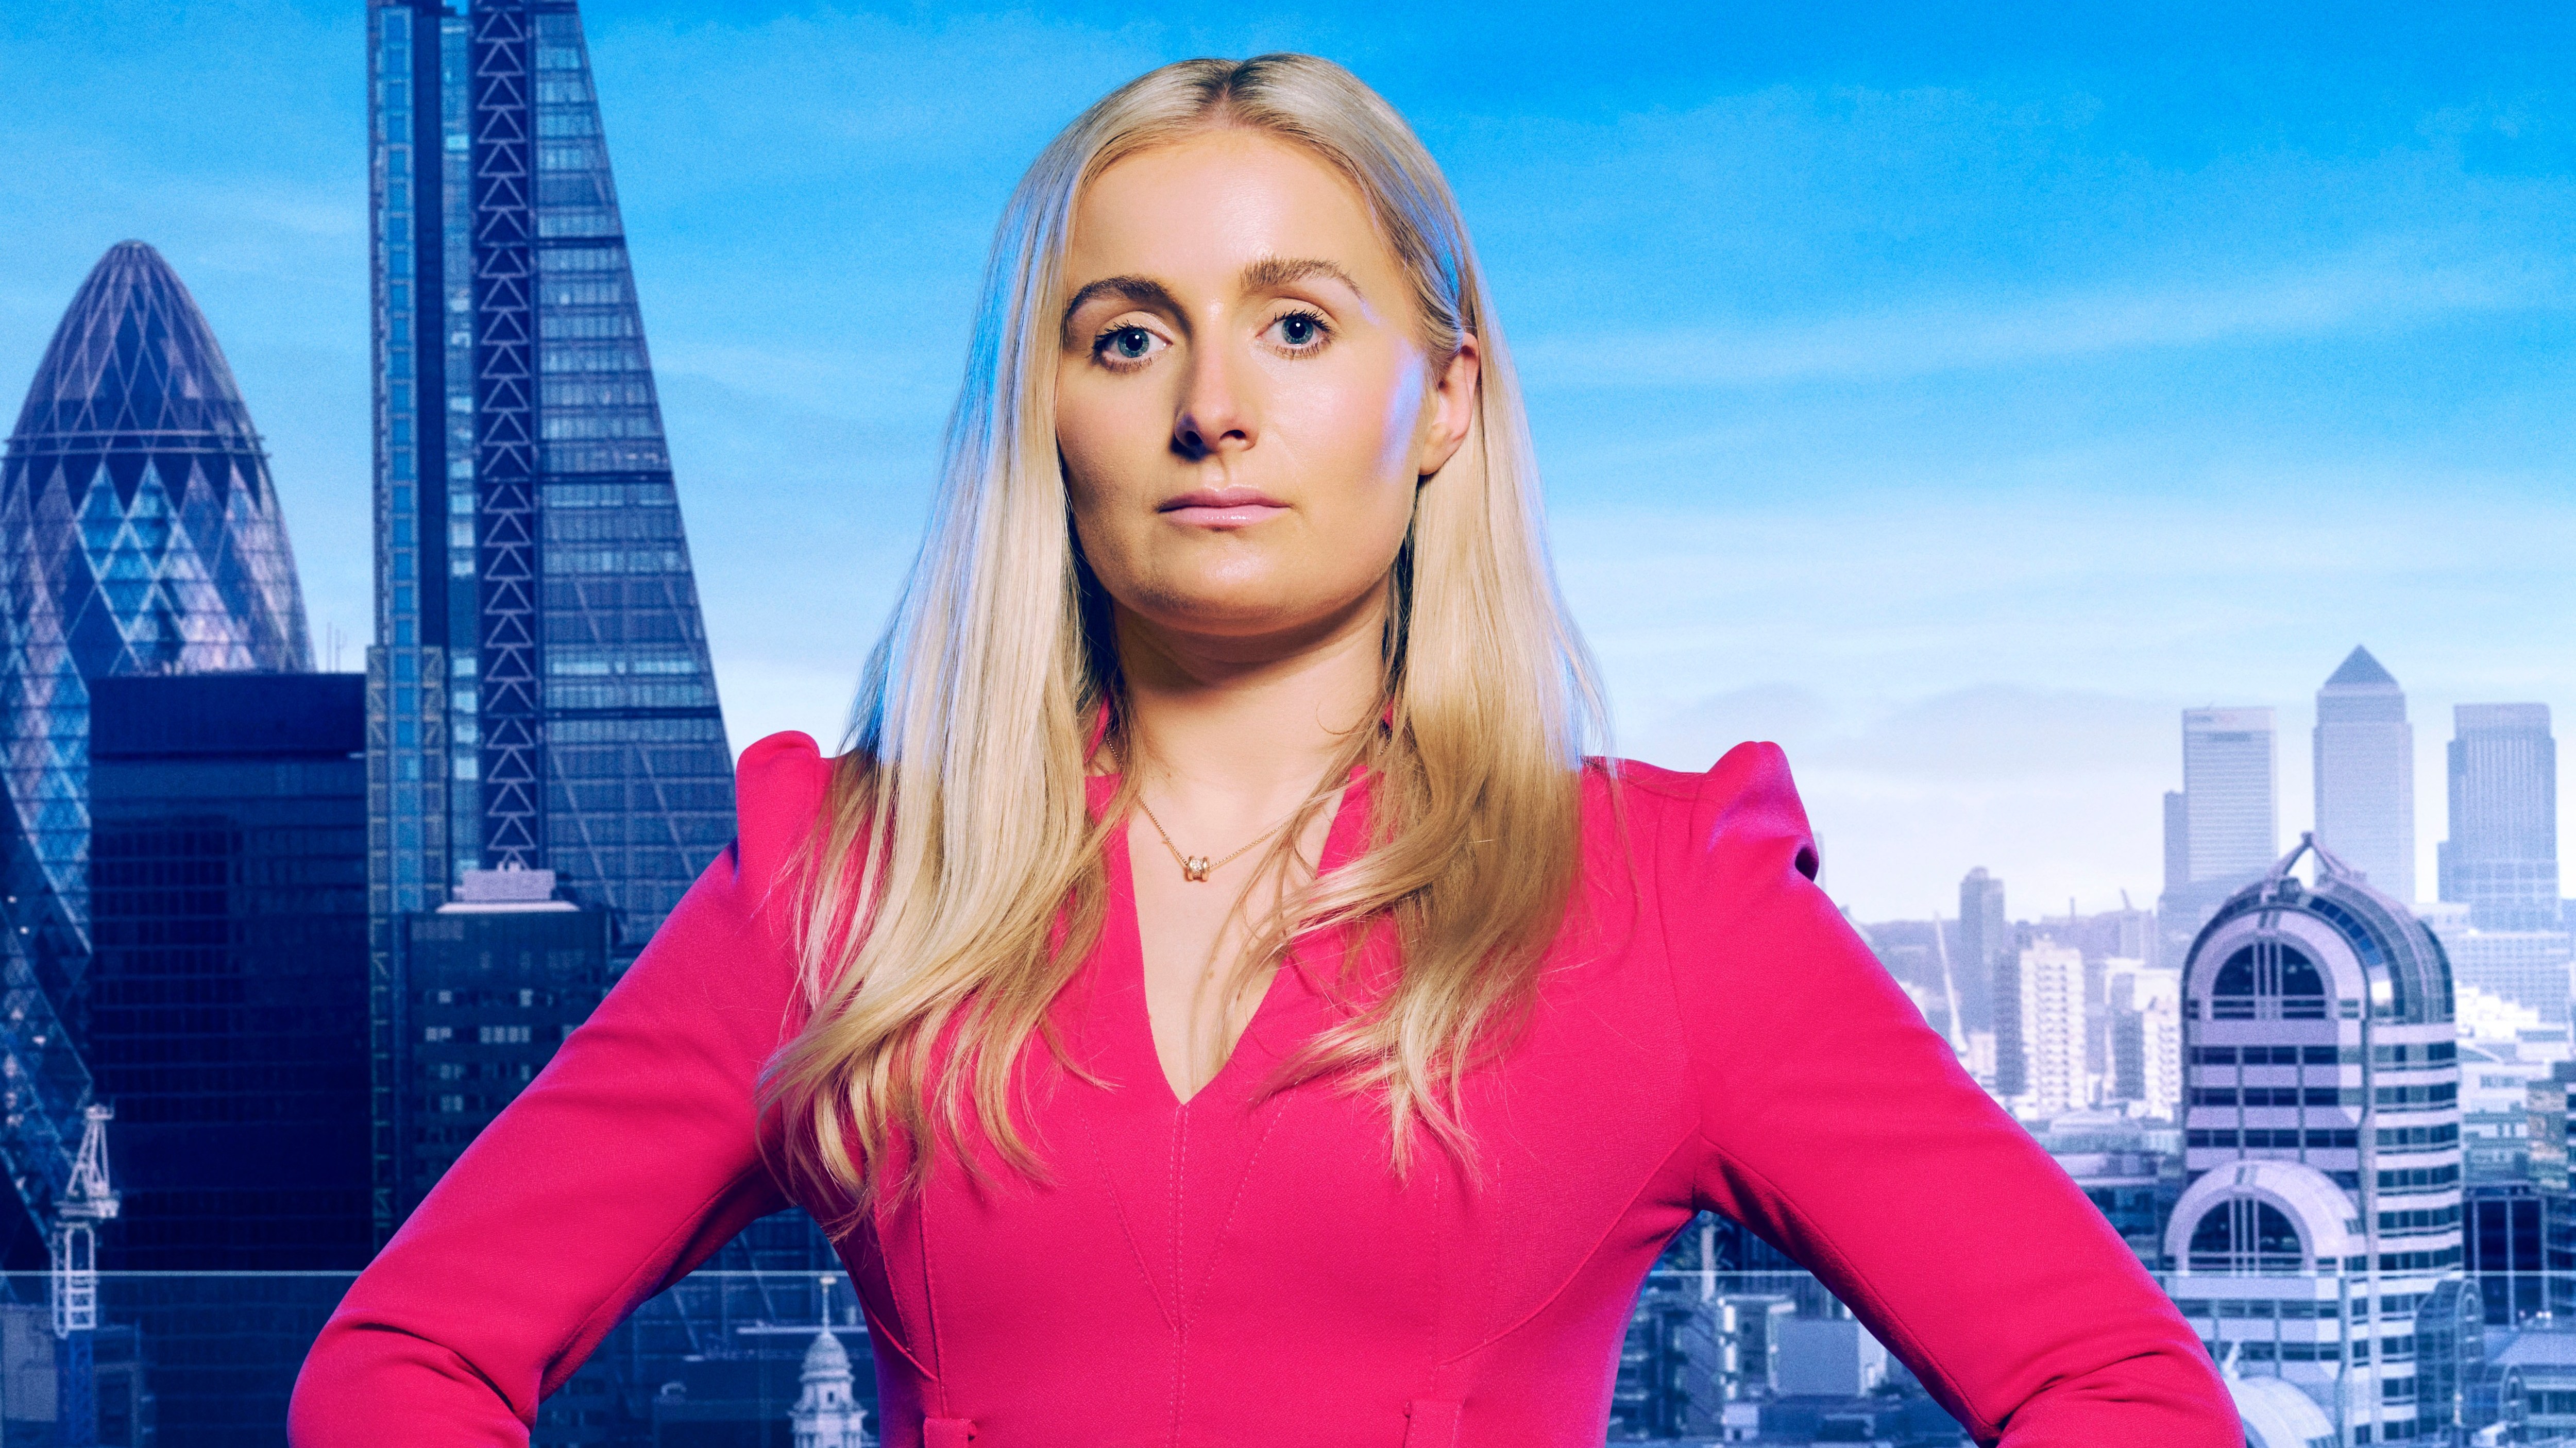 Rachel Woolford, the winner of the latest series of The Apprentice